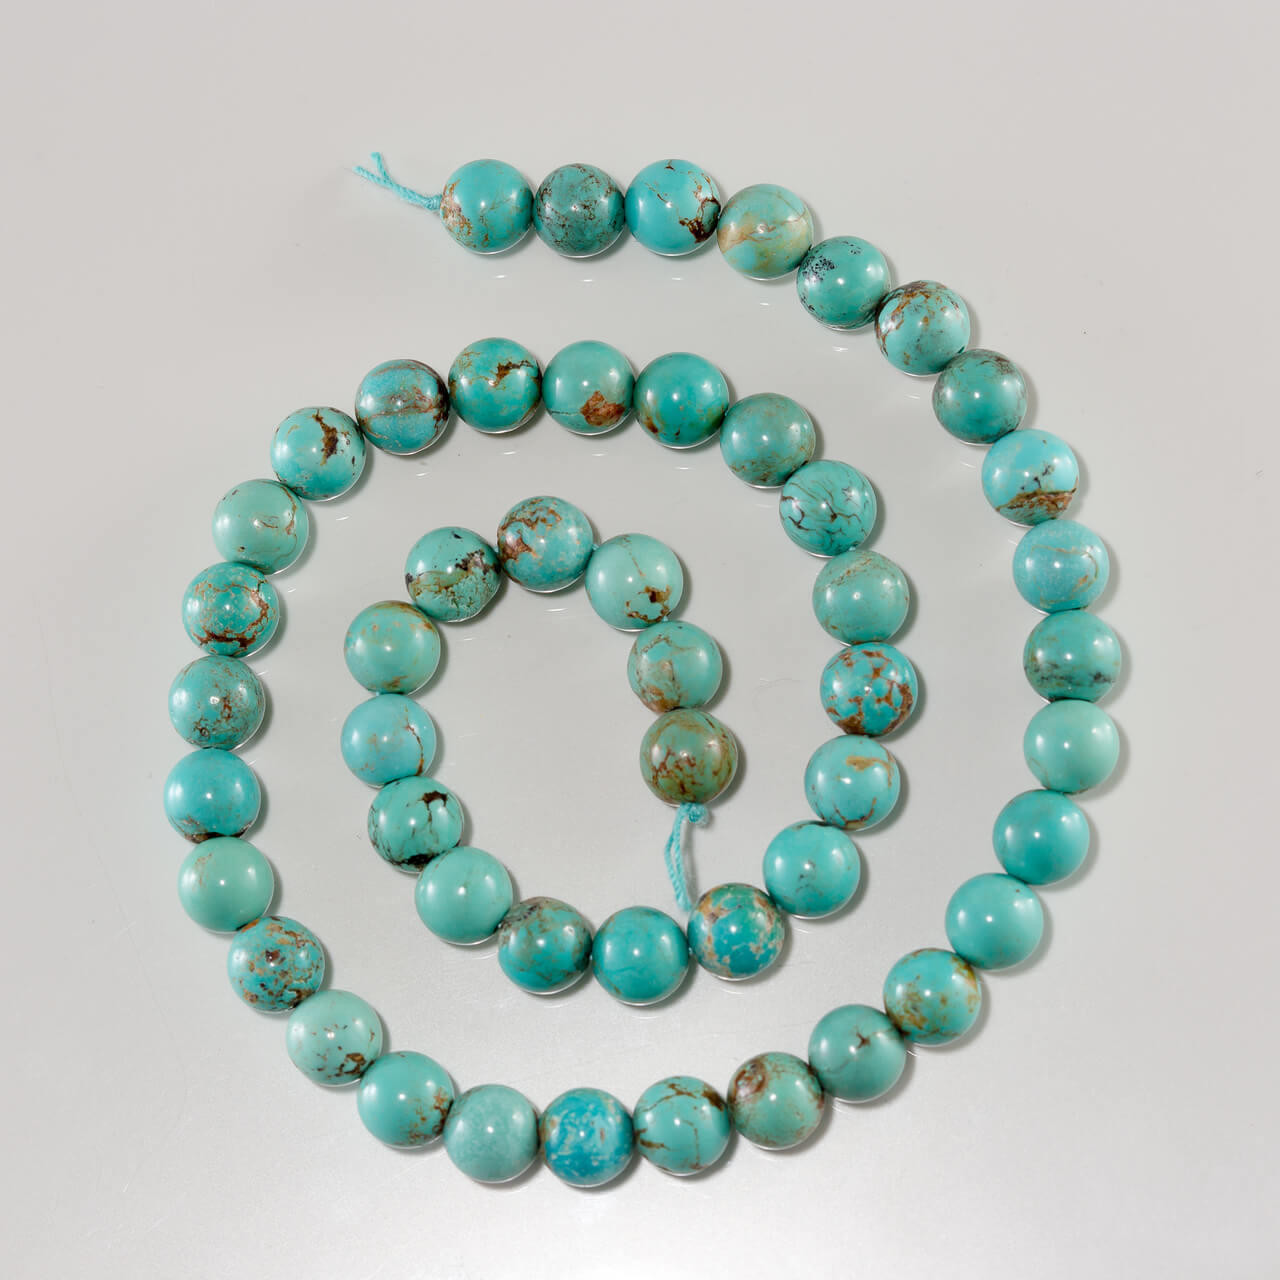 Turquoise Beads Baja Turquoise(Mexico) 8mm Rounds  BTR1h 